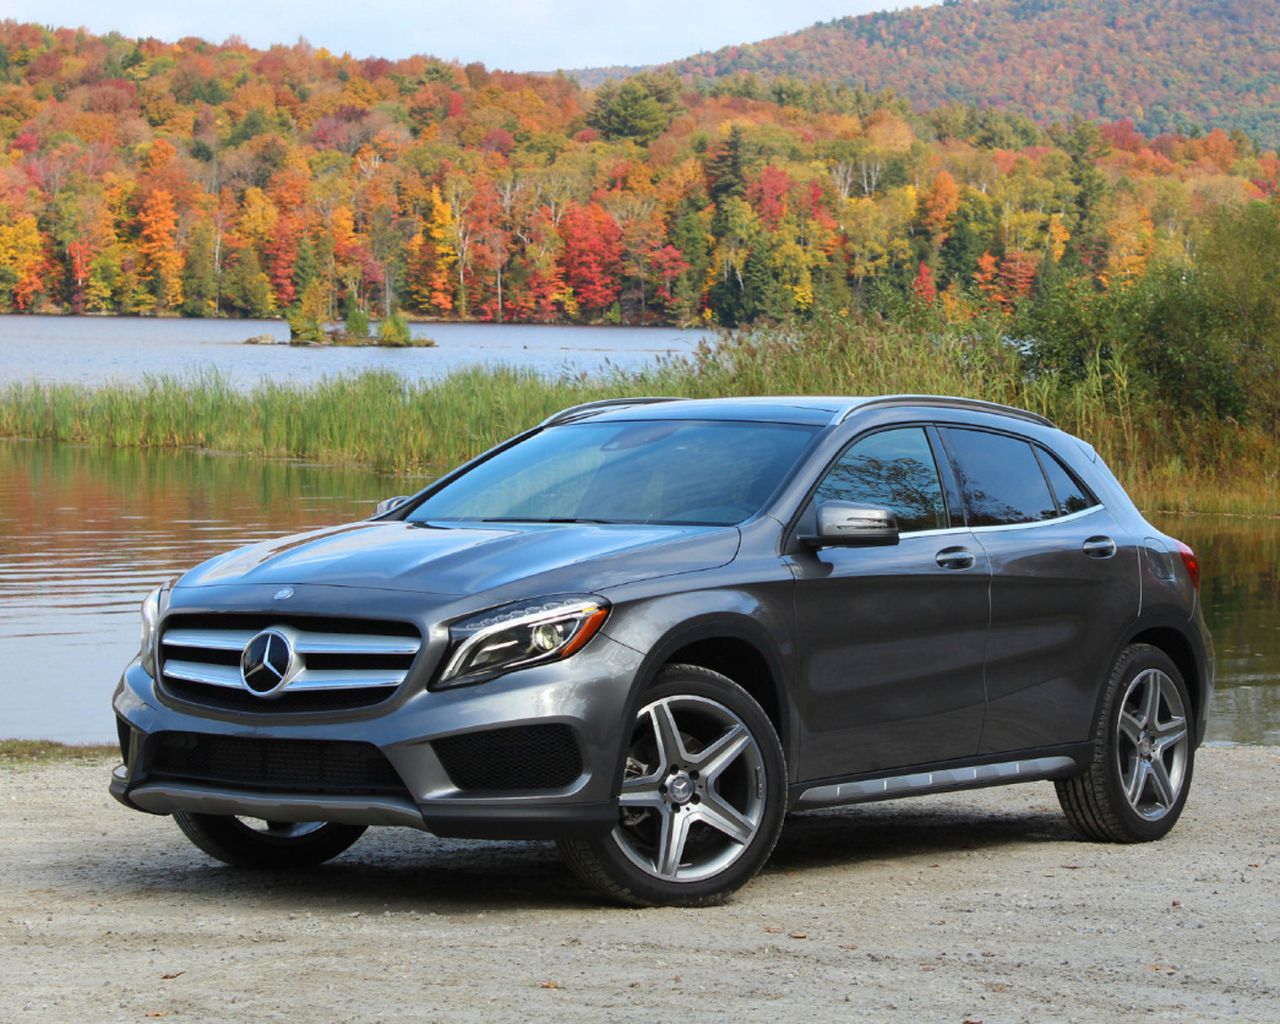 Third time's a charm for Mercedes-Benz with its 2015 GLA | The Star